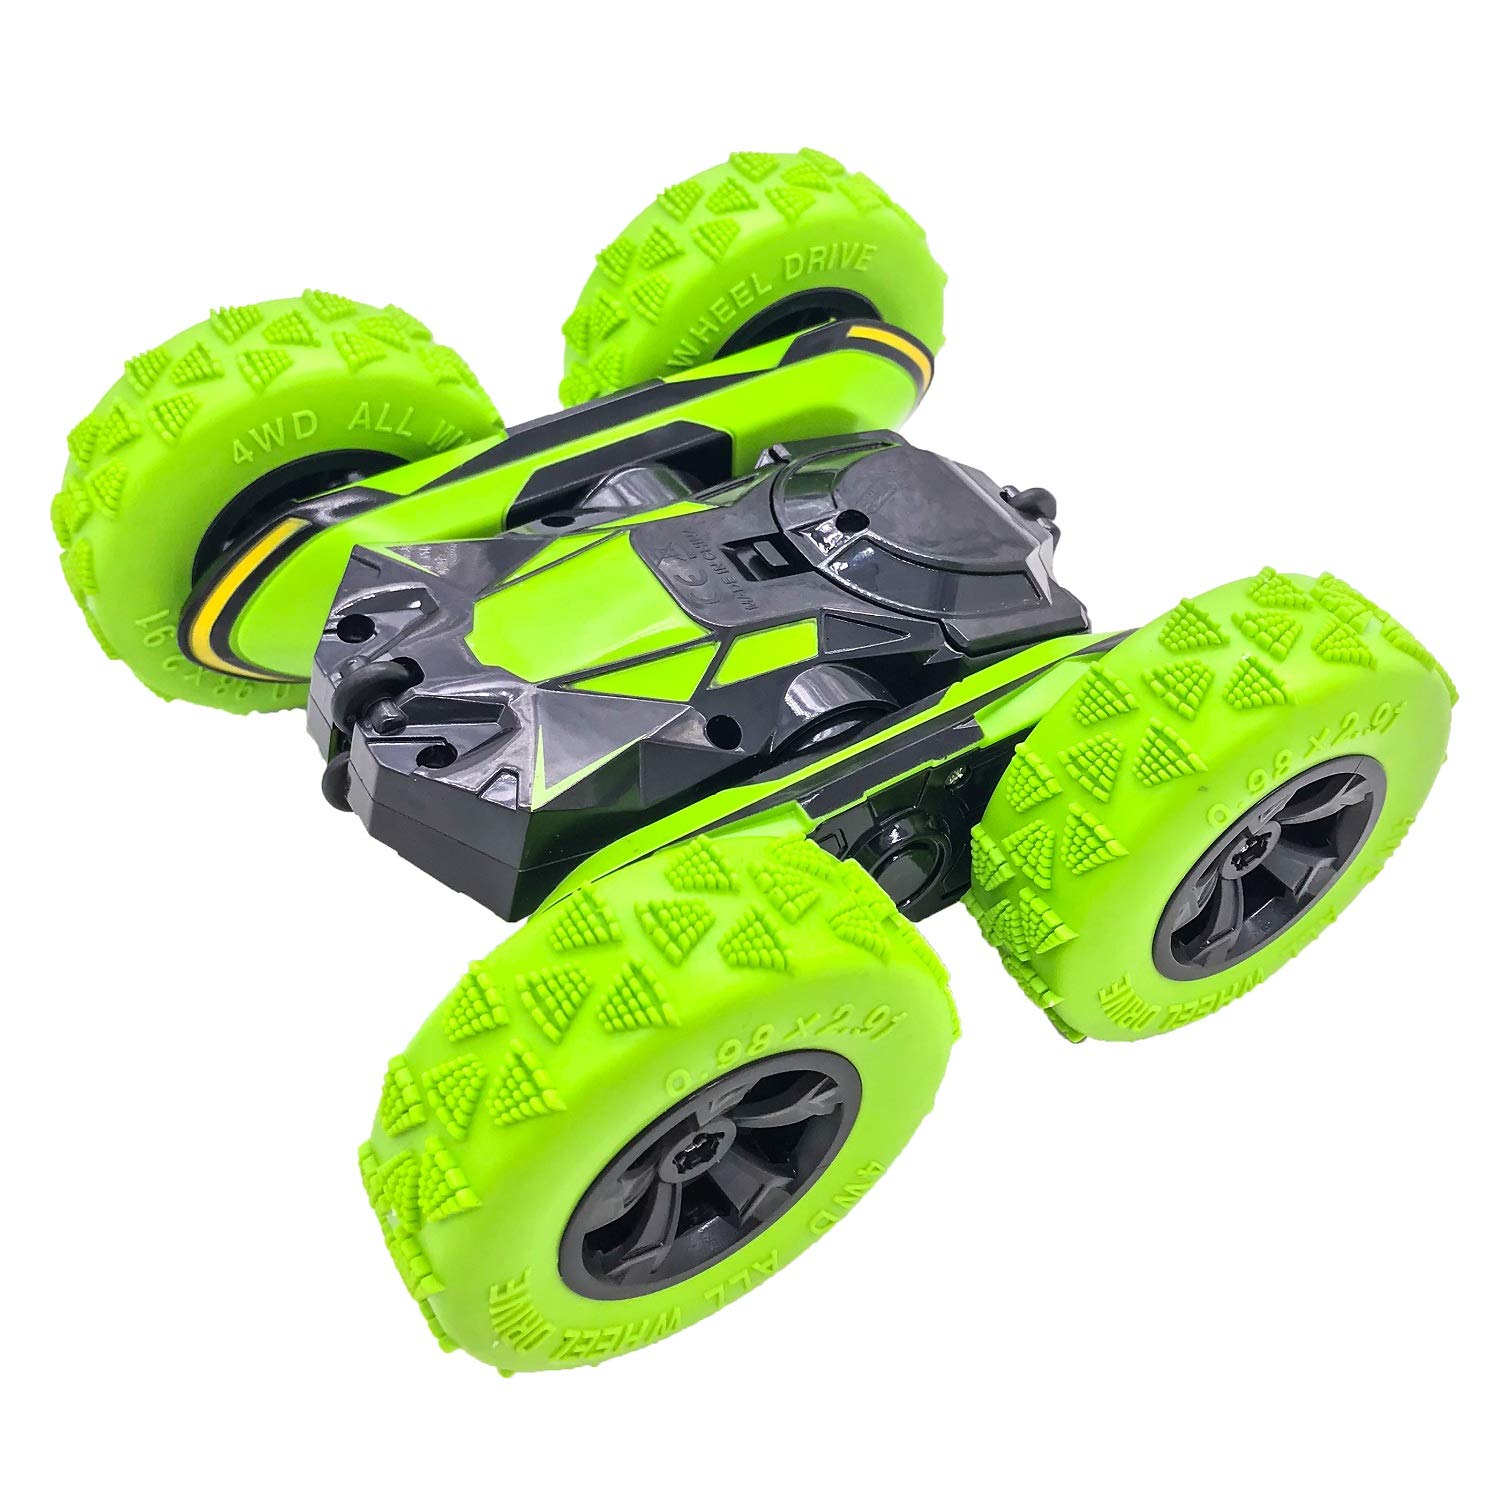 Threeking RC Cars Stunt car Remote Control Car Double Sided 360° Flips Rotating 4WD Outdoor Indoor car Toy Present Gift for Boys/Girls Ages 6+